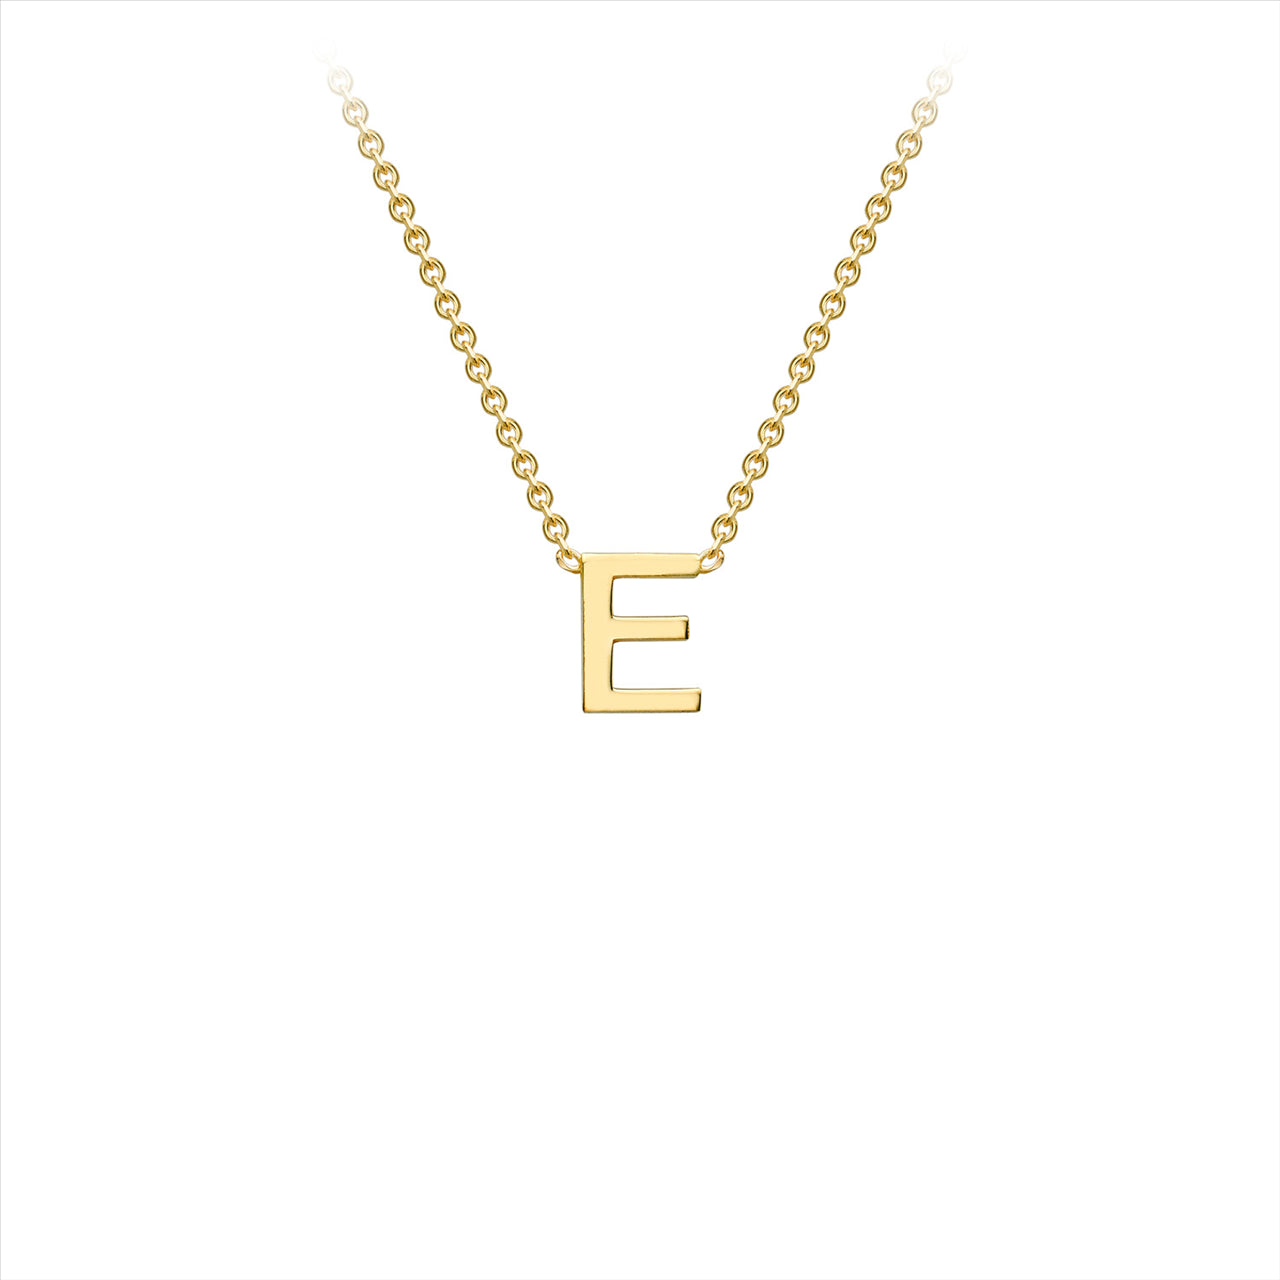 9K Yellow Gold 'E' Initial Adjustable Necklace 38cm-43cm